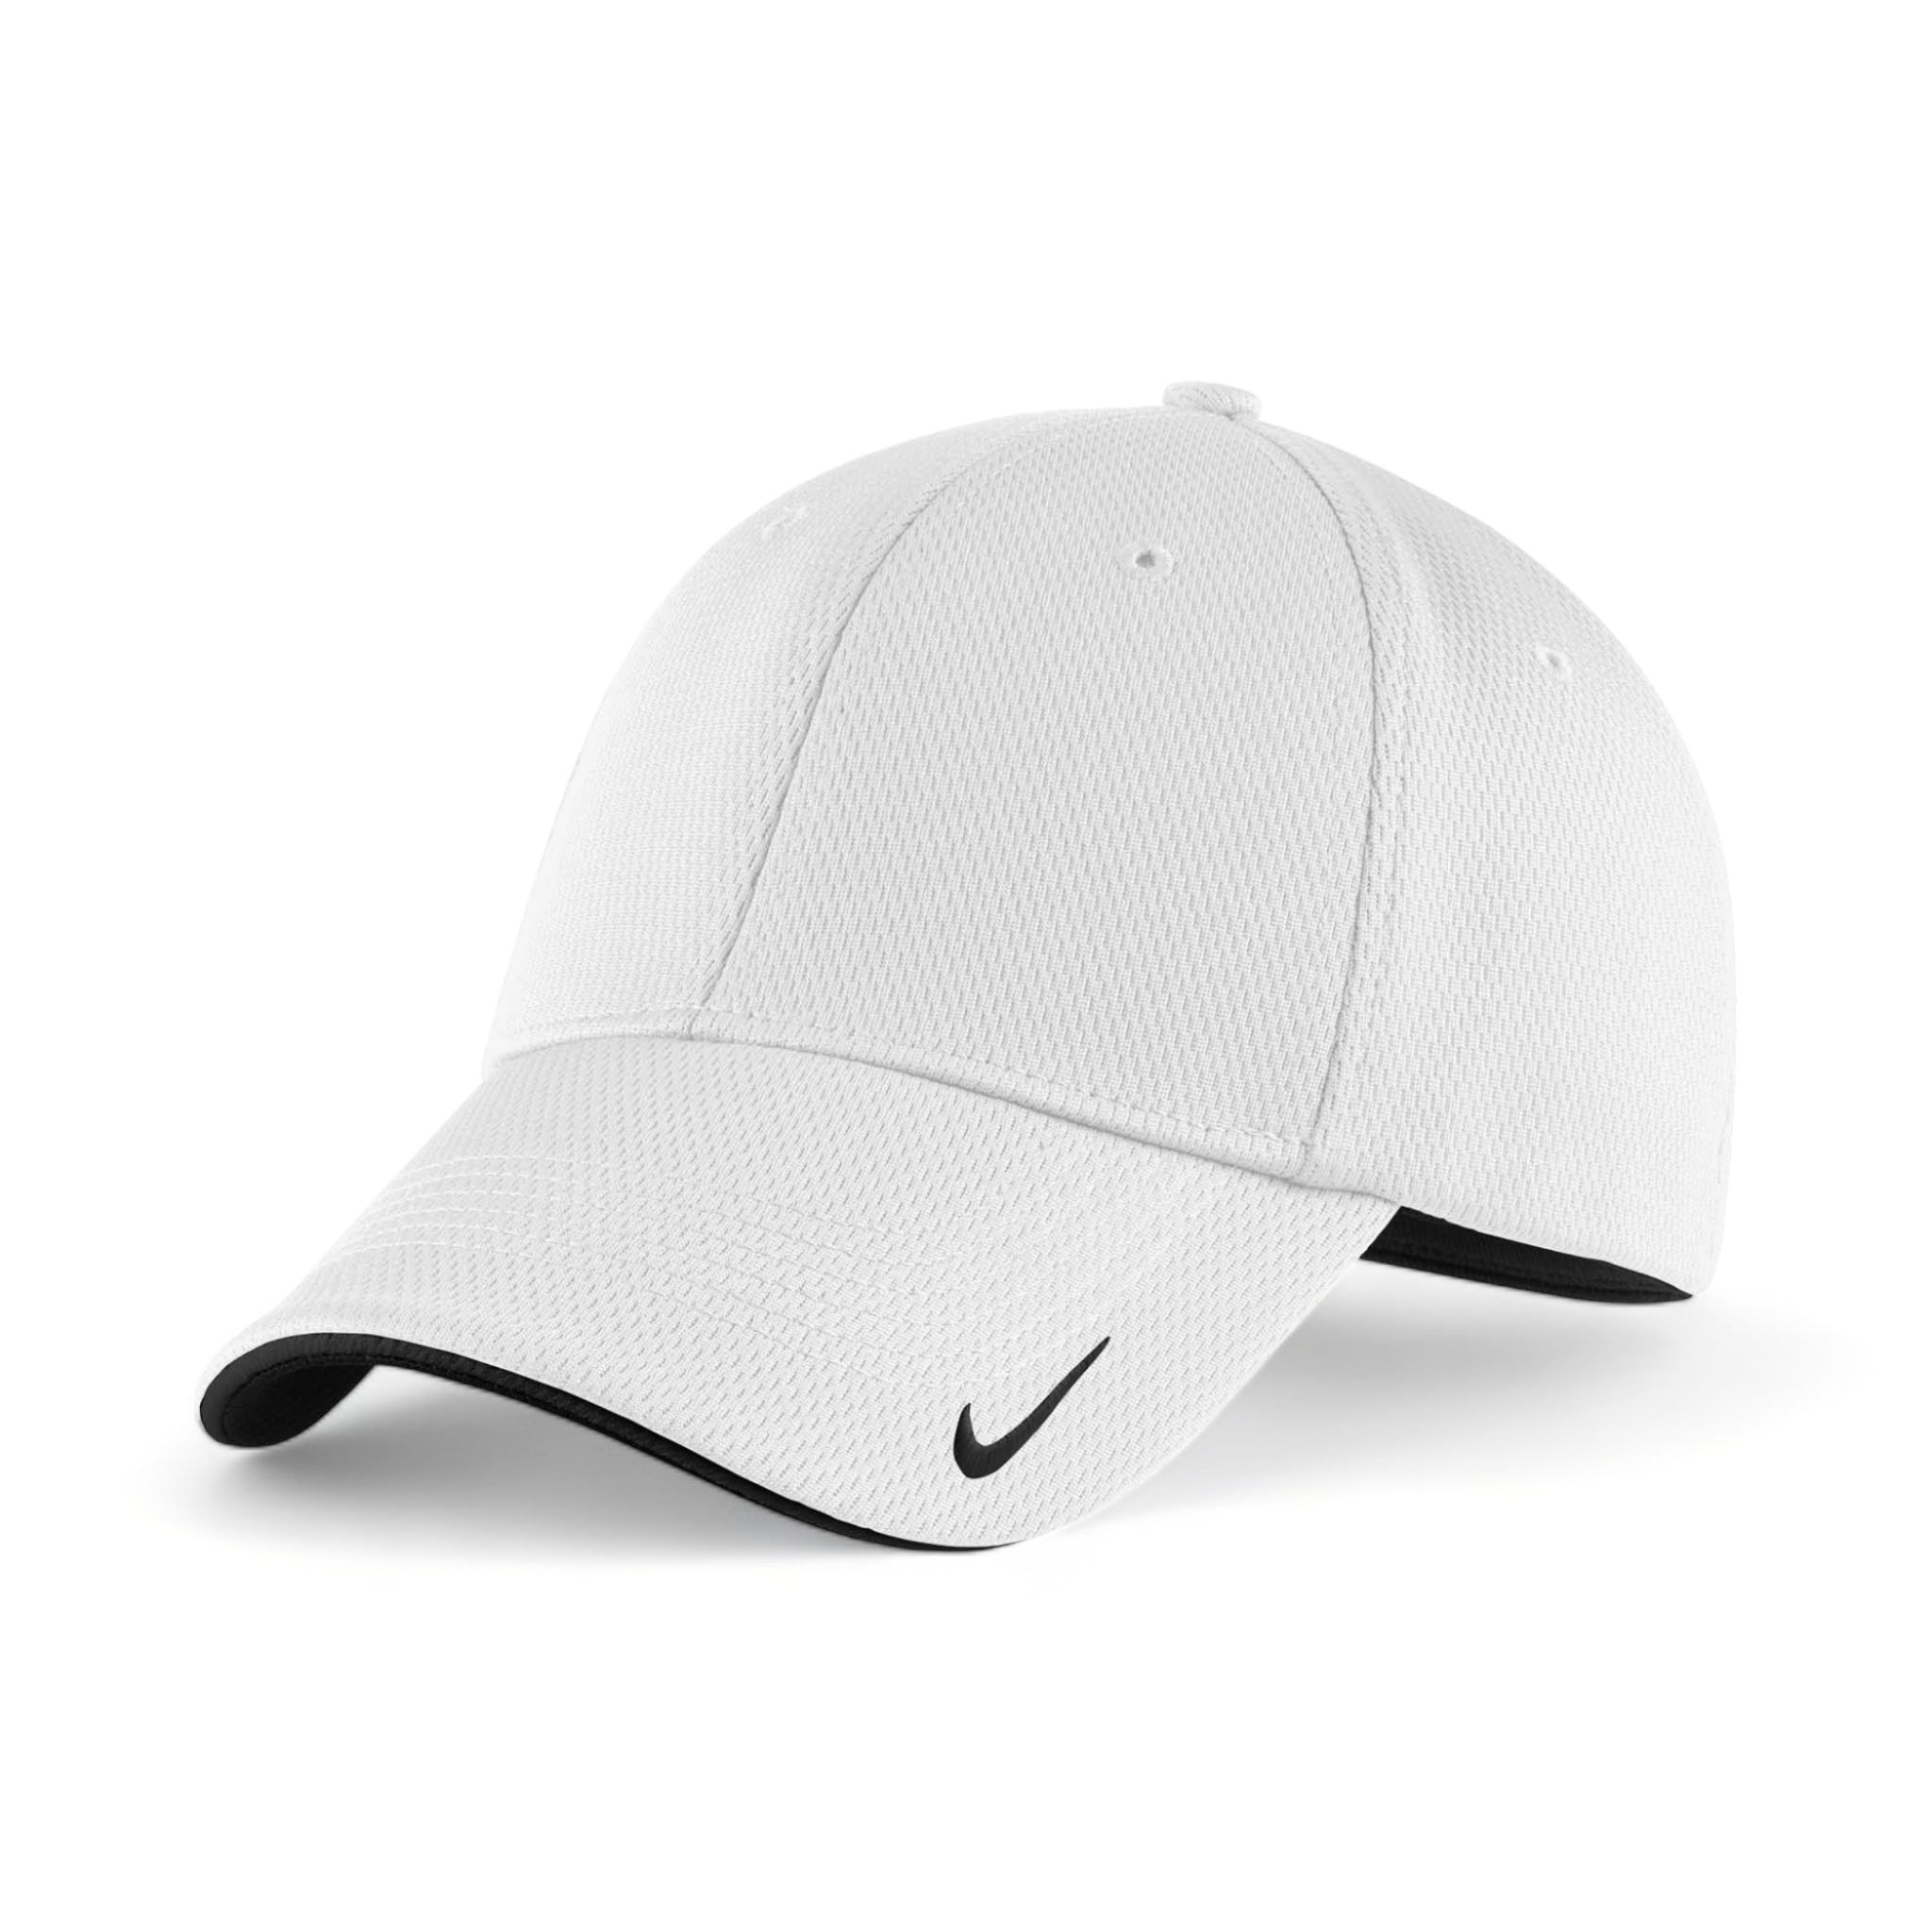 Side view of Nike NKFD9718 custom hat in white and black